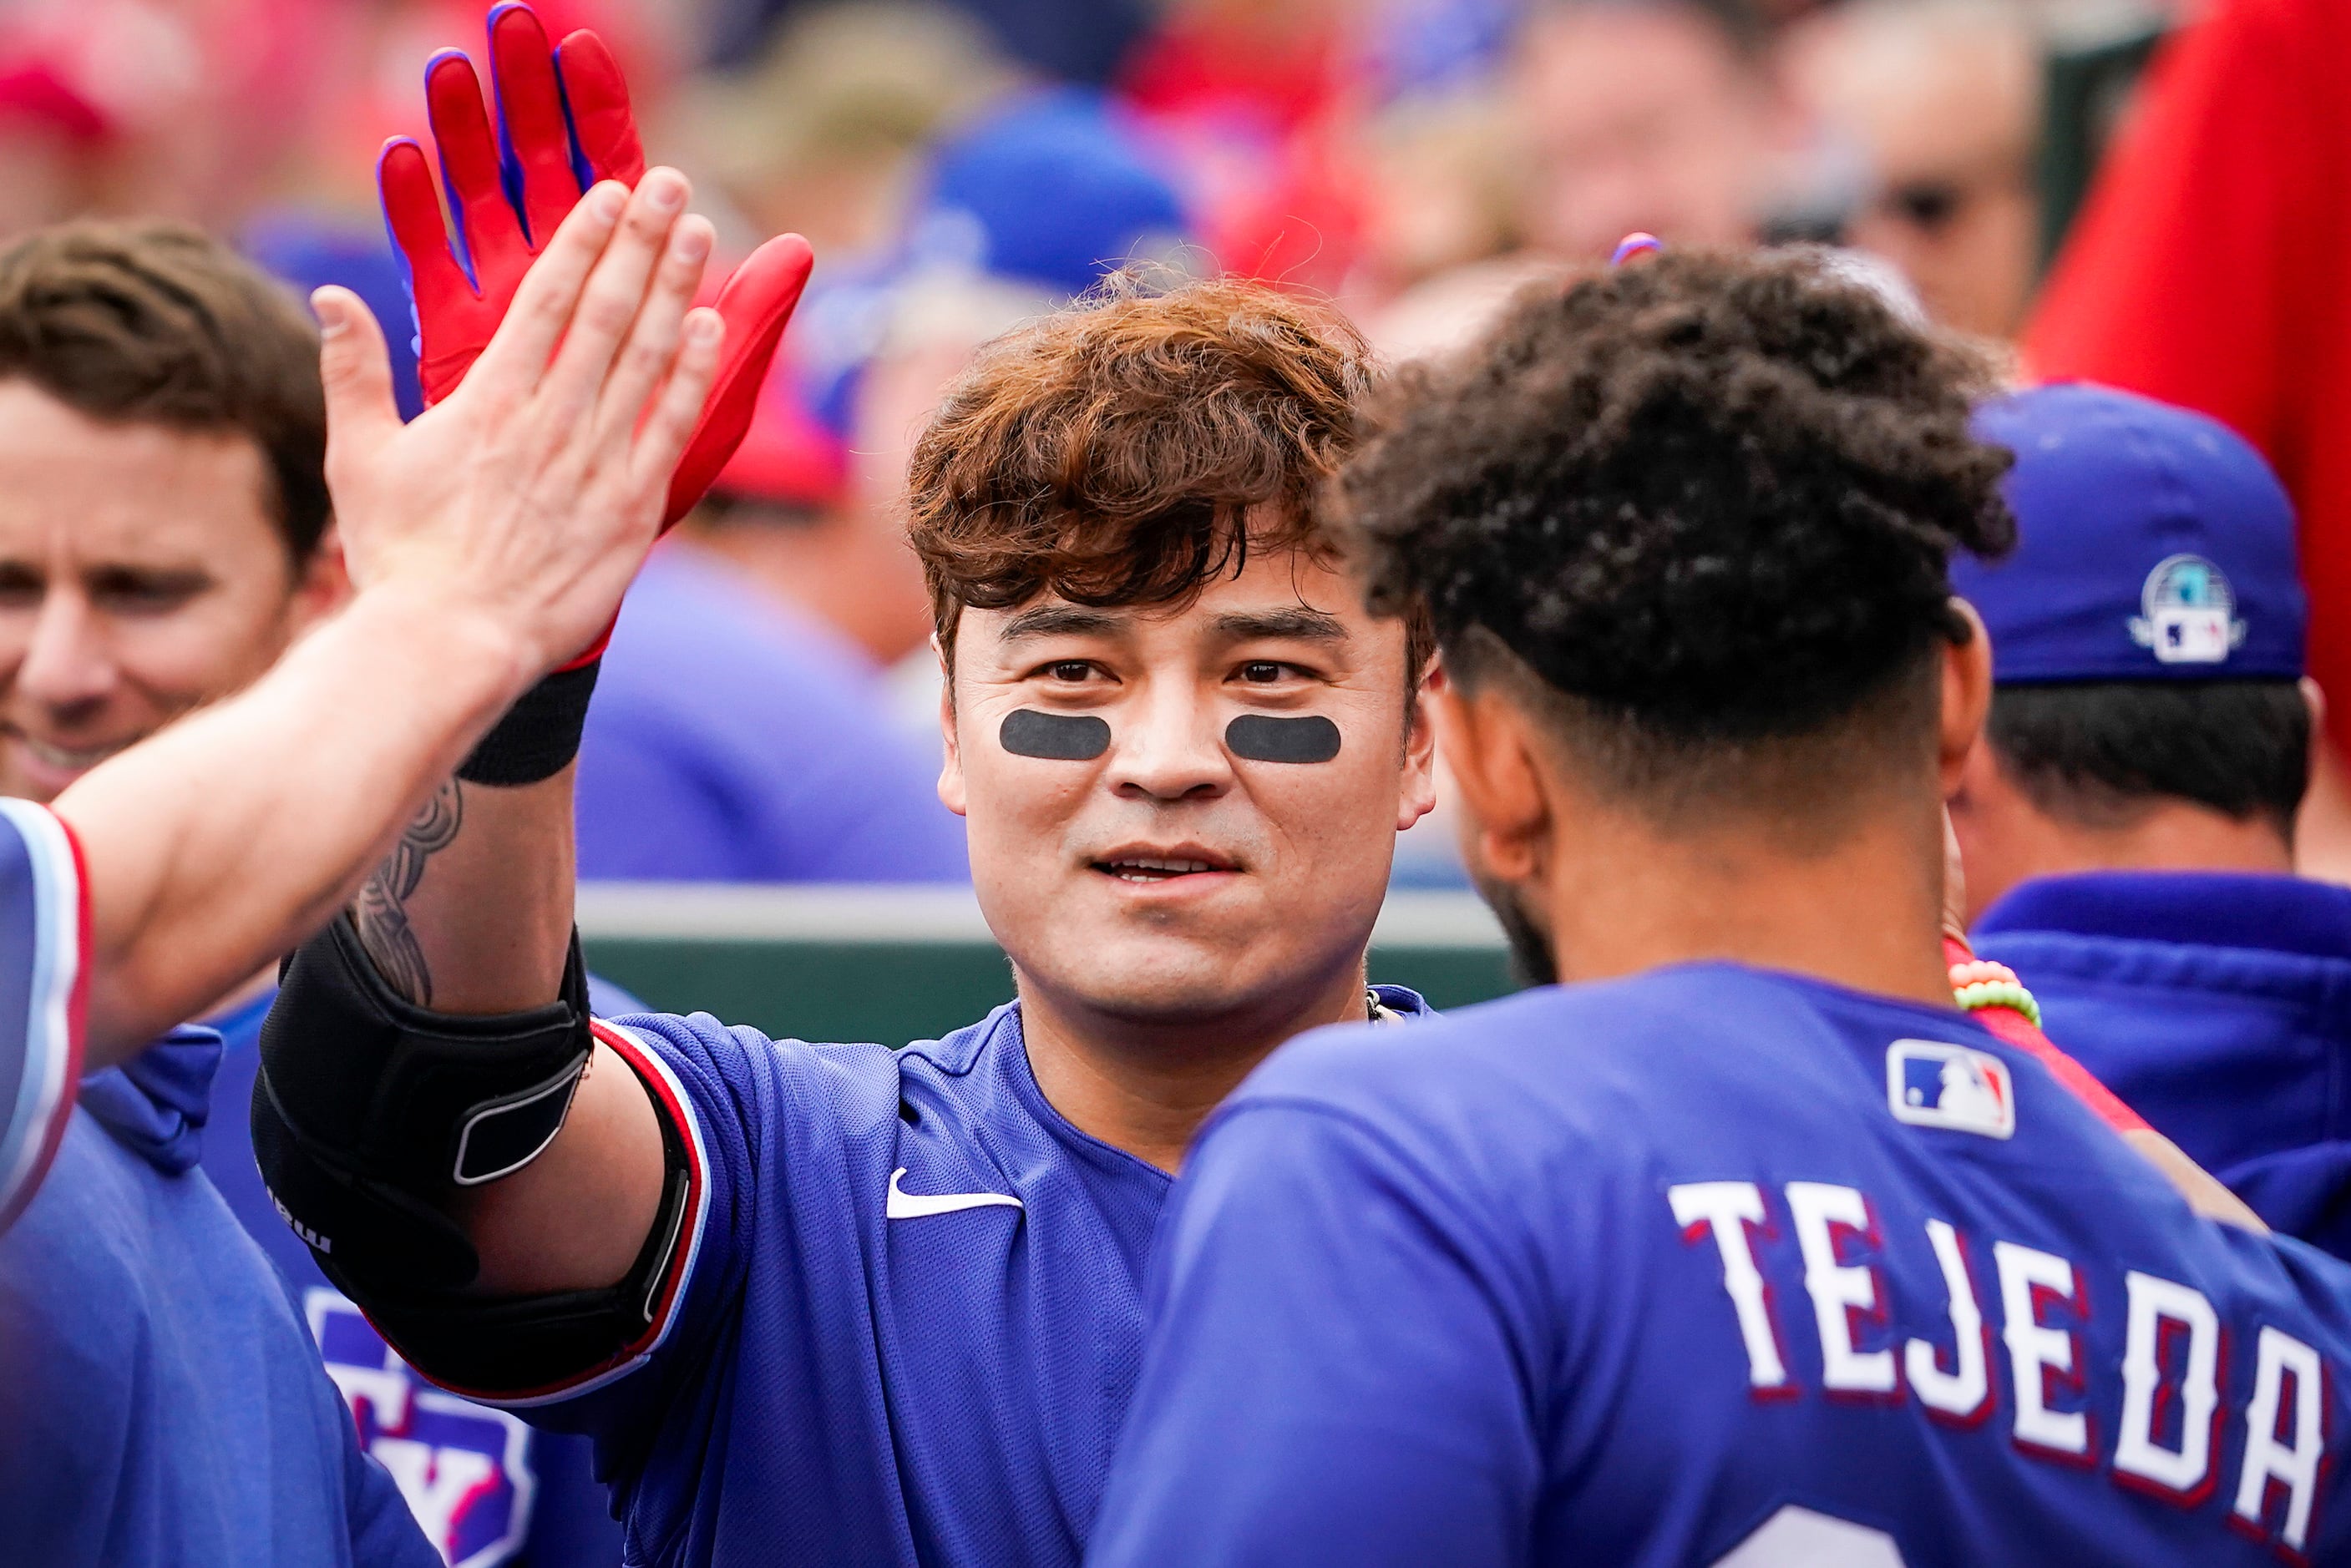 Need a team to root for in the KBO League? Rangers DH-OF Shin-Soo Choo  tells you which one it should be